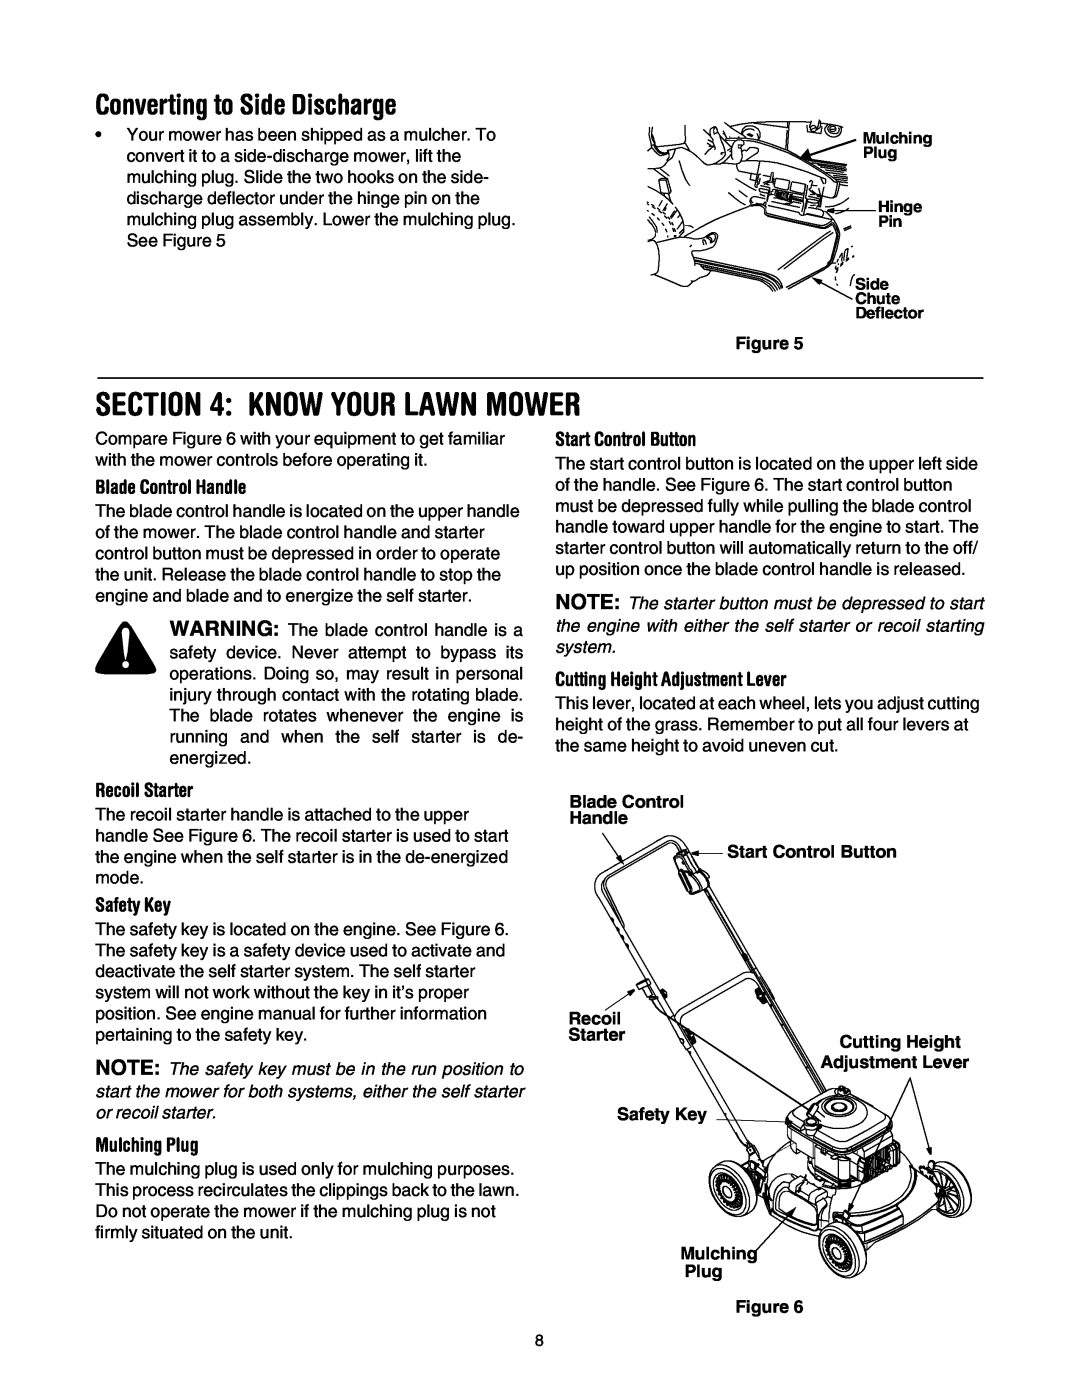 Yard-Man 106D manual Know Your Lawn Mower, Converting to Side Discharge, Blade Control Handle, Recoil Starter, Safety Key 